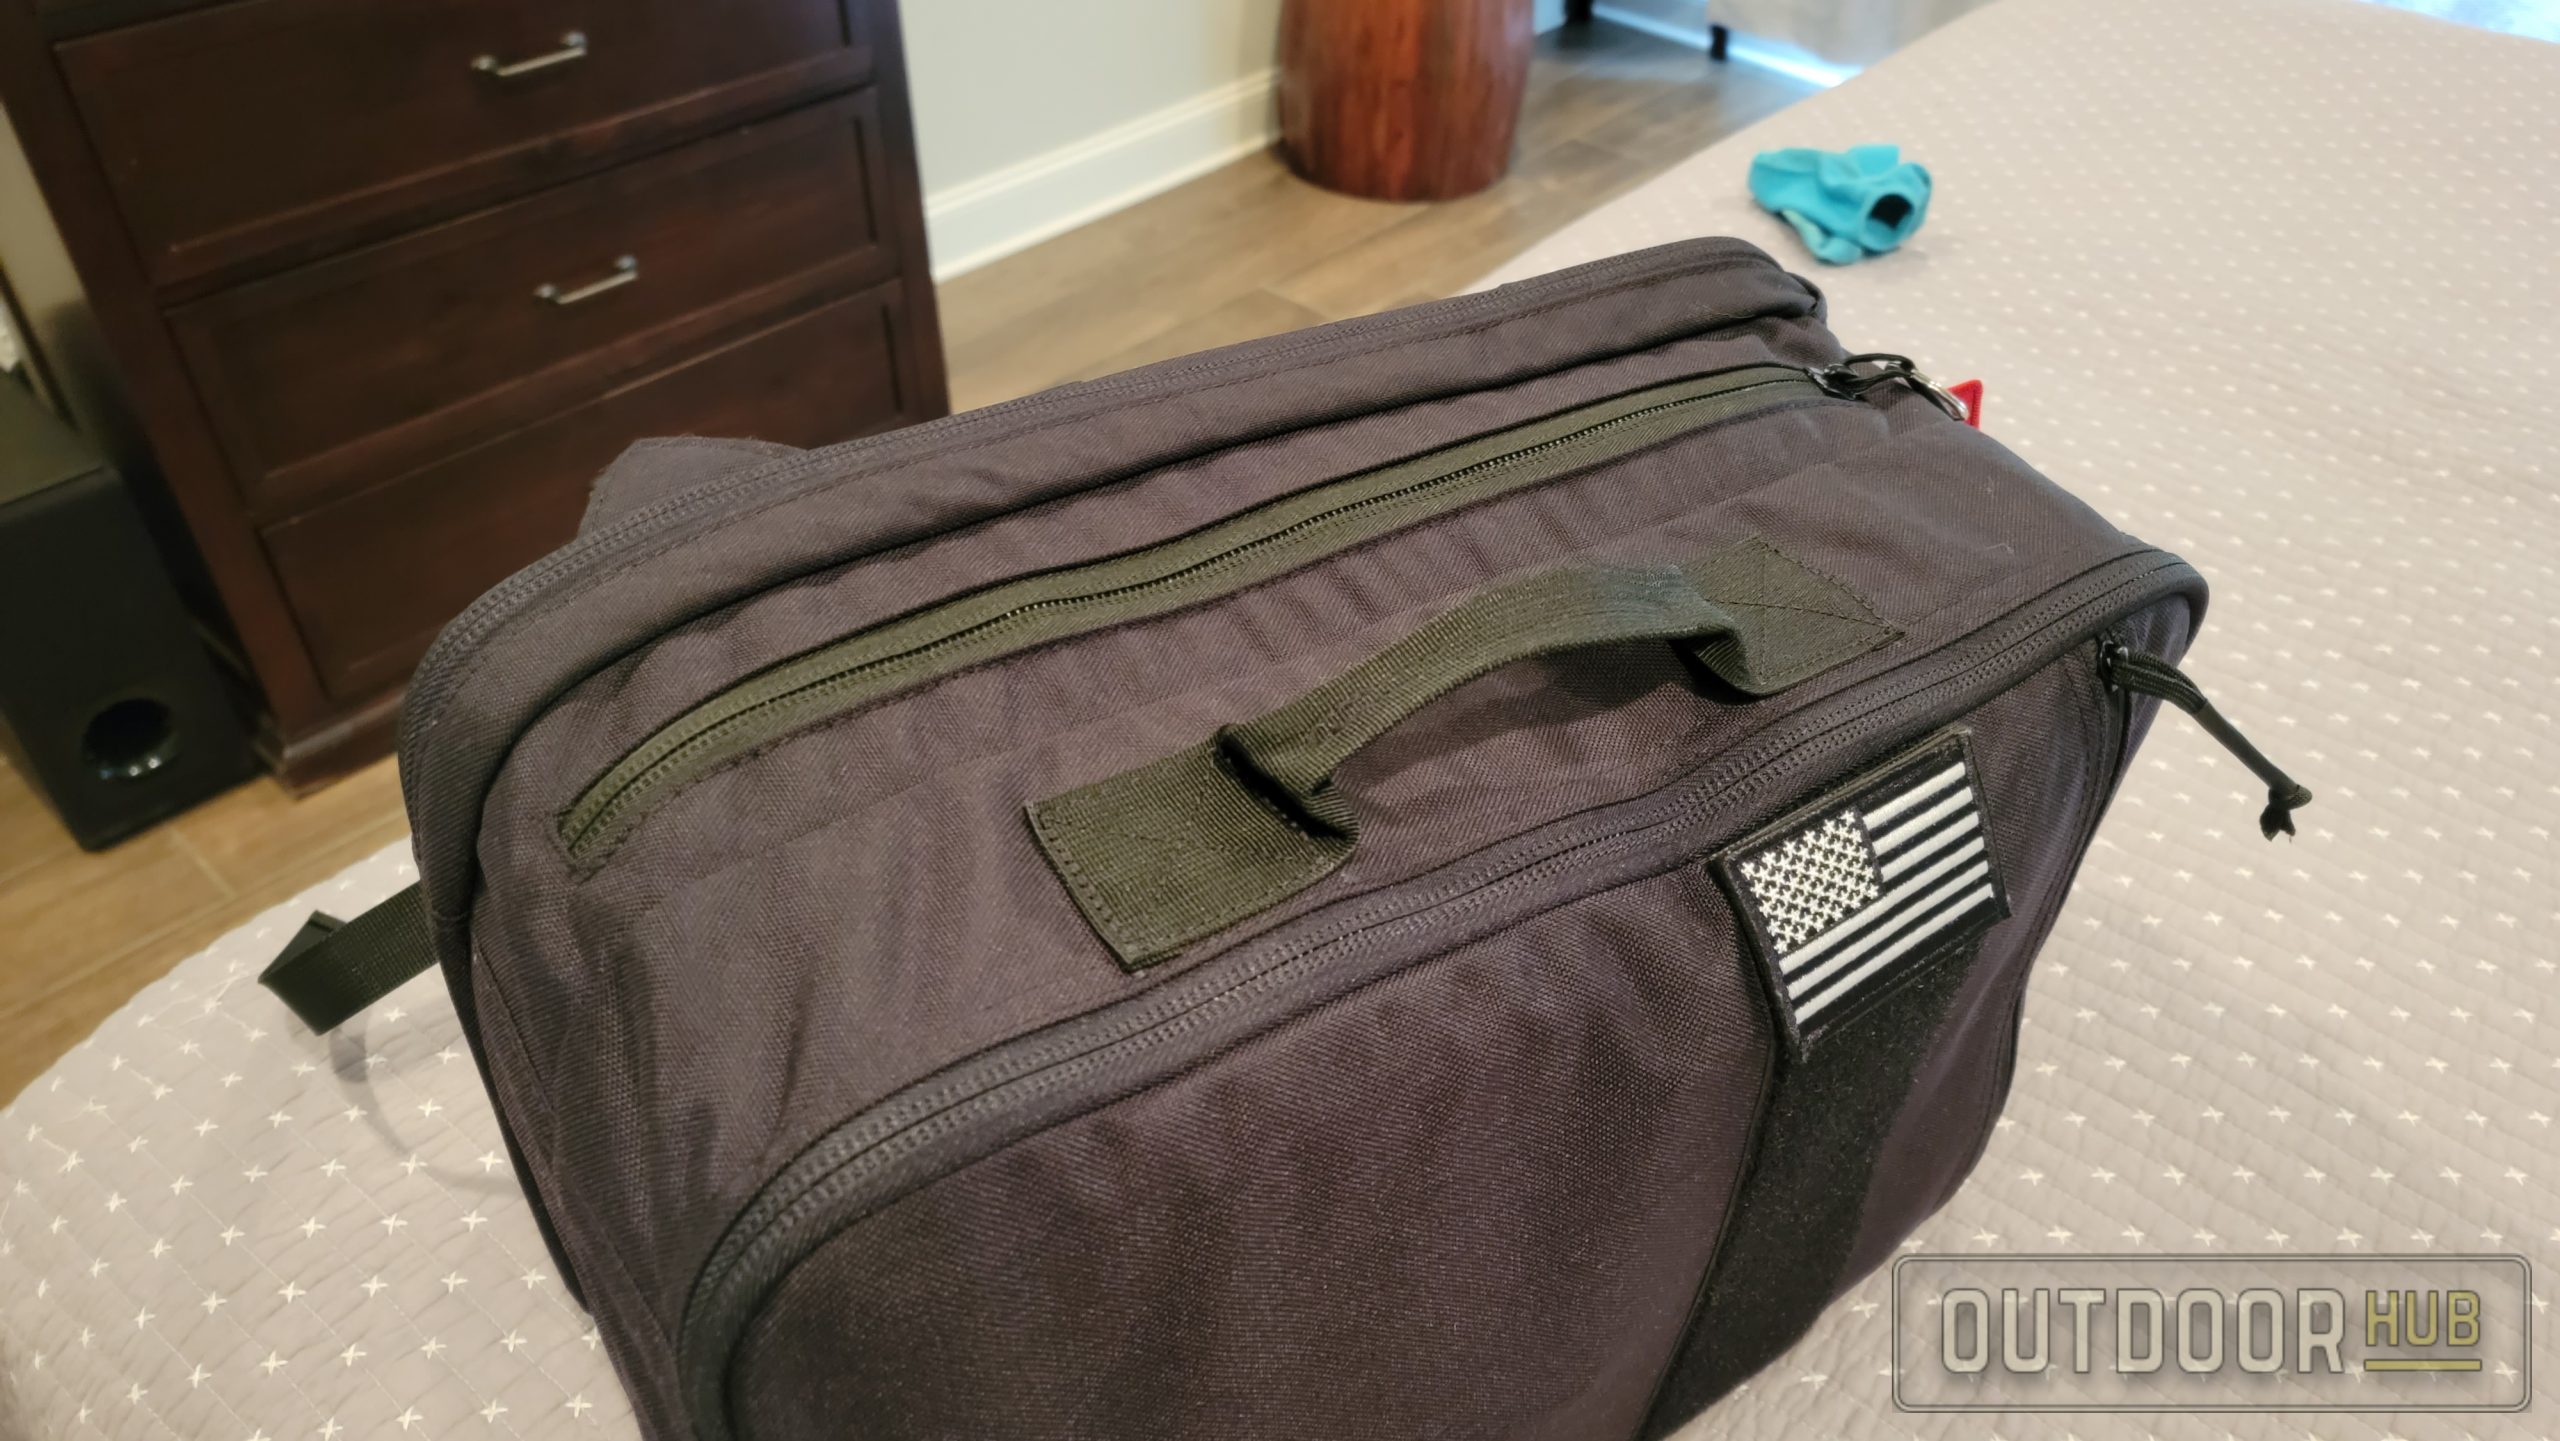 REVIEW: The New Stealth 20L Backpack from Grey Man Tactical